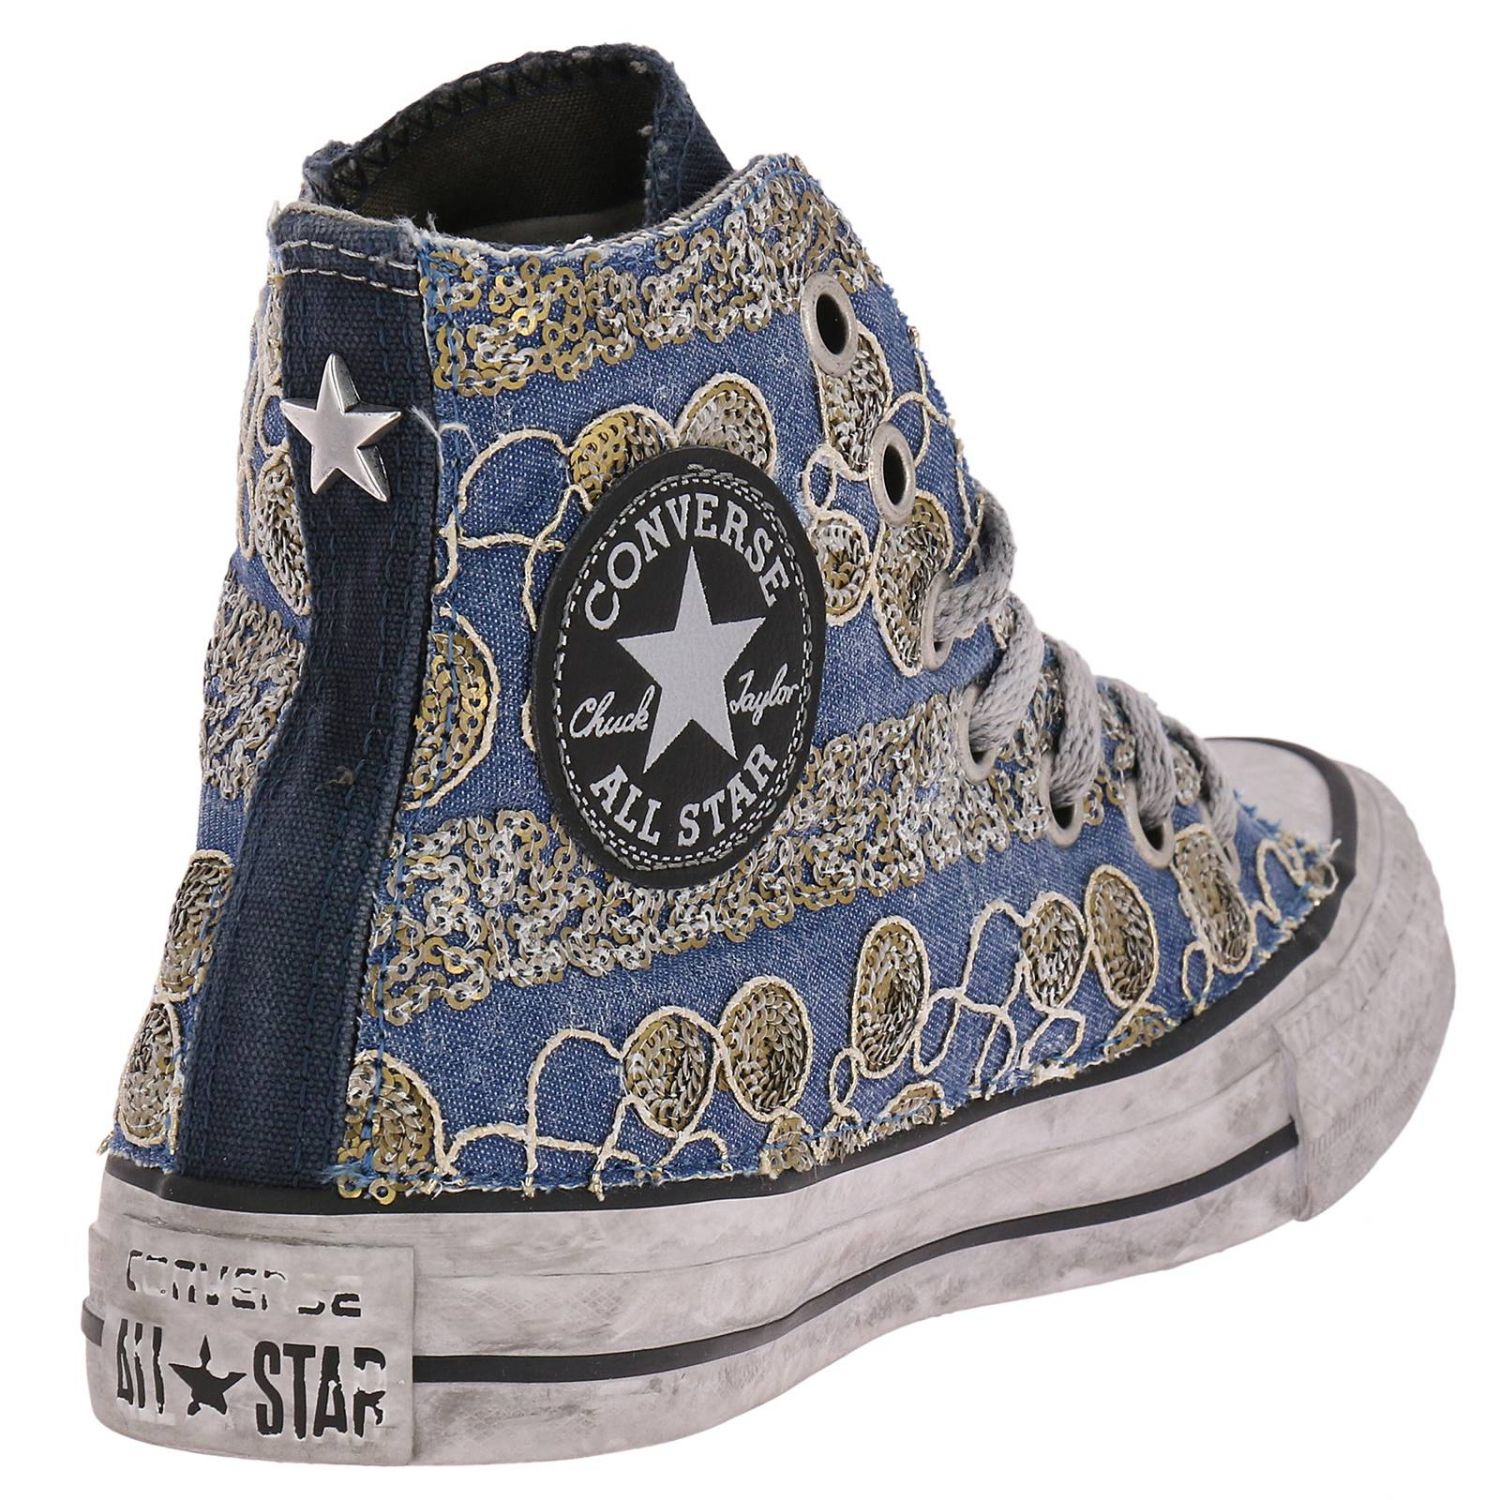 Sneakers women Converse Limited Edition | Sneakers Converse Limited Edition  Women Gold | Sneakers Converse Limited Edition 160417C Giglio EN